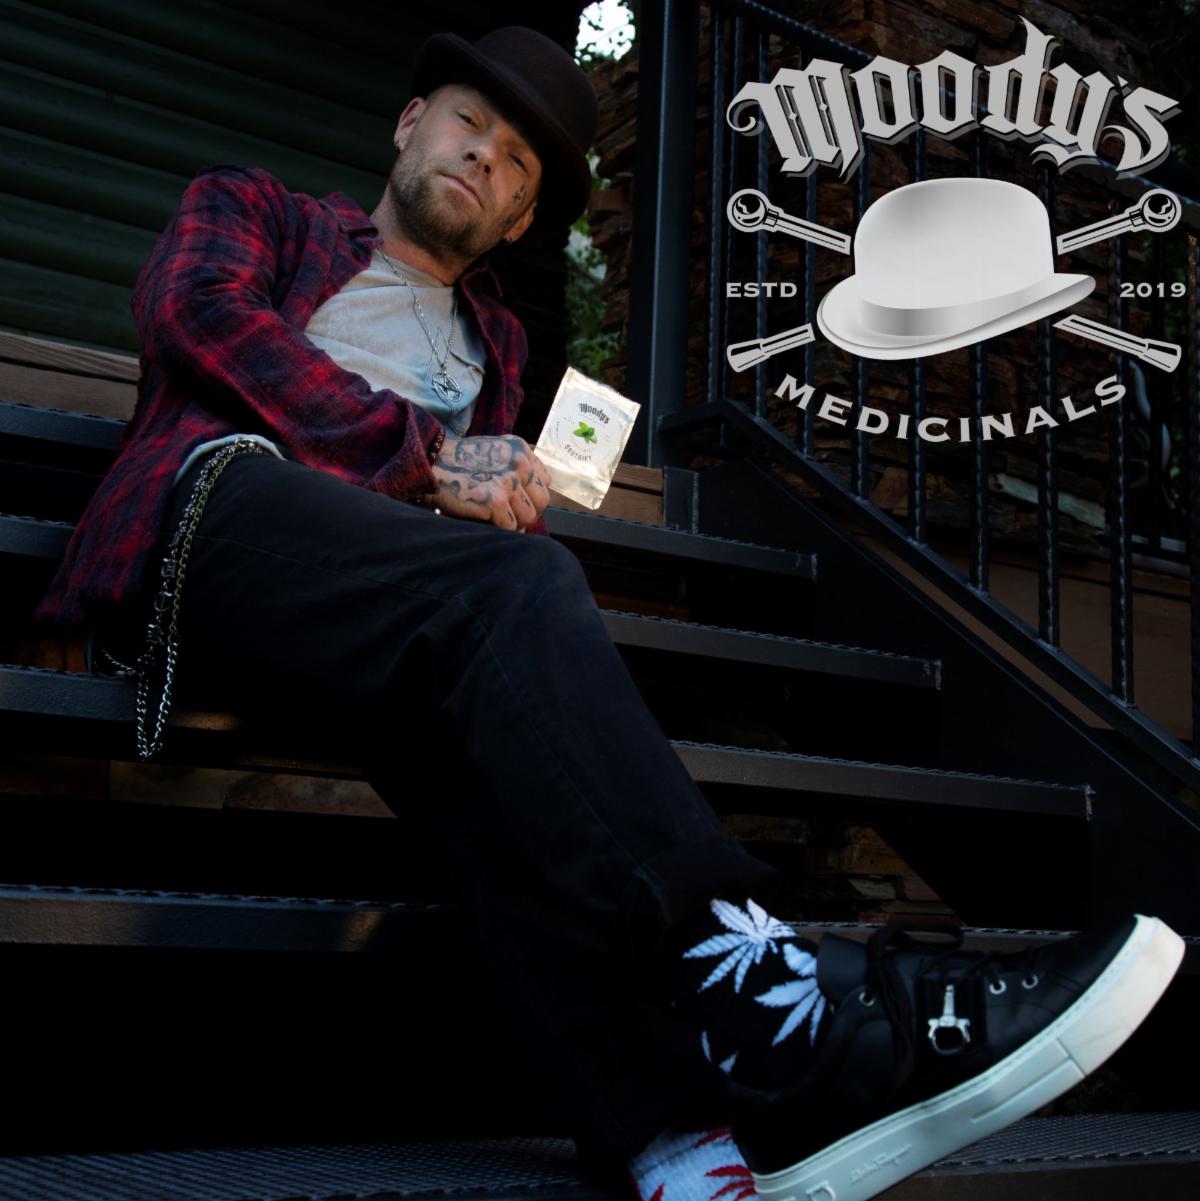 Moody’s Medicinals: Five Finger Death Punch Vocalist Ivan Moody Announces First-Ever Sweepstakes To Support First Responders And More